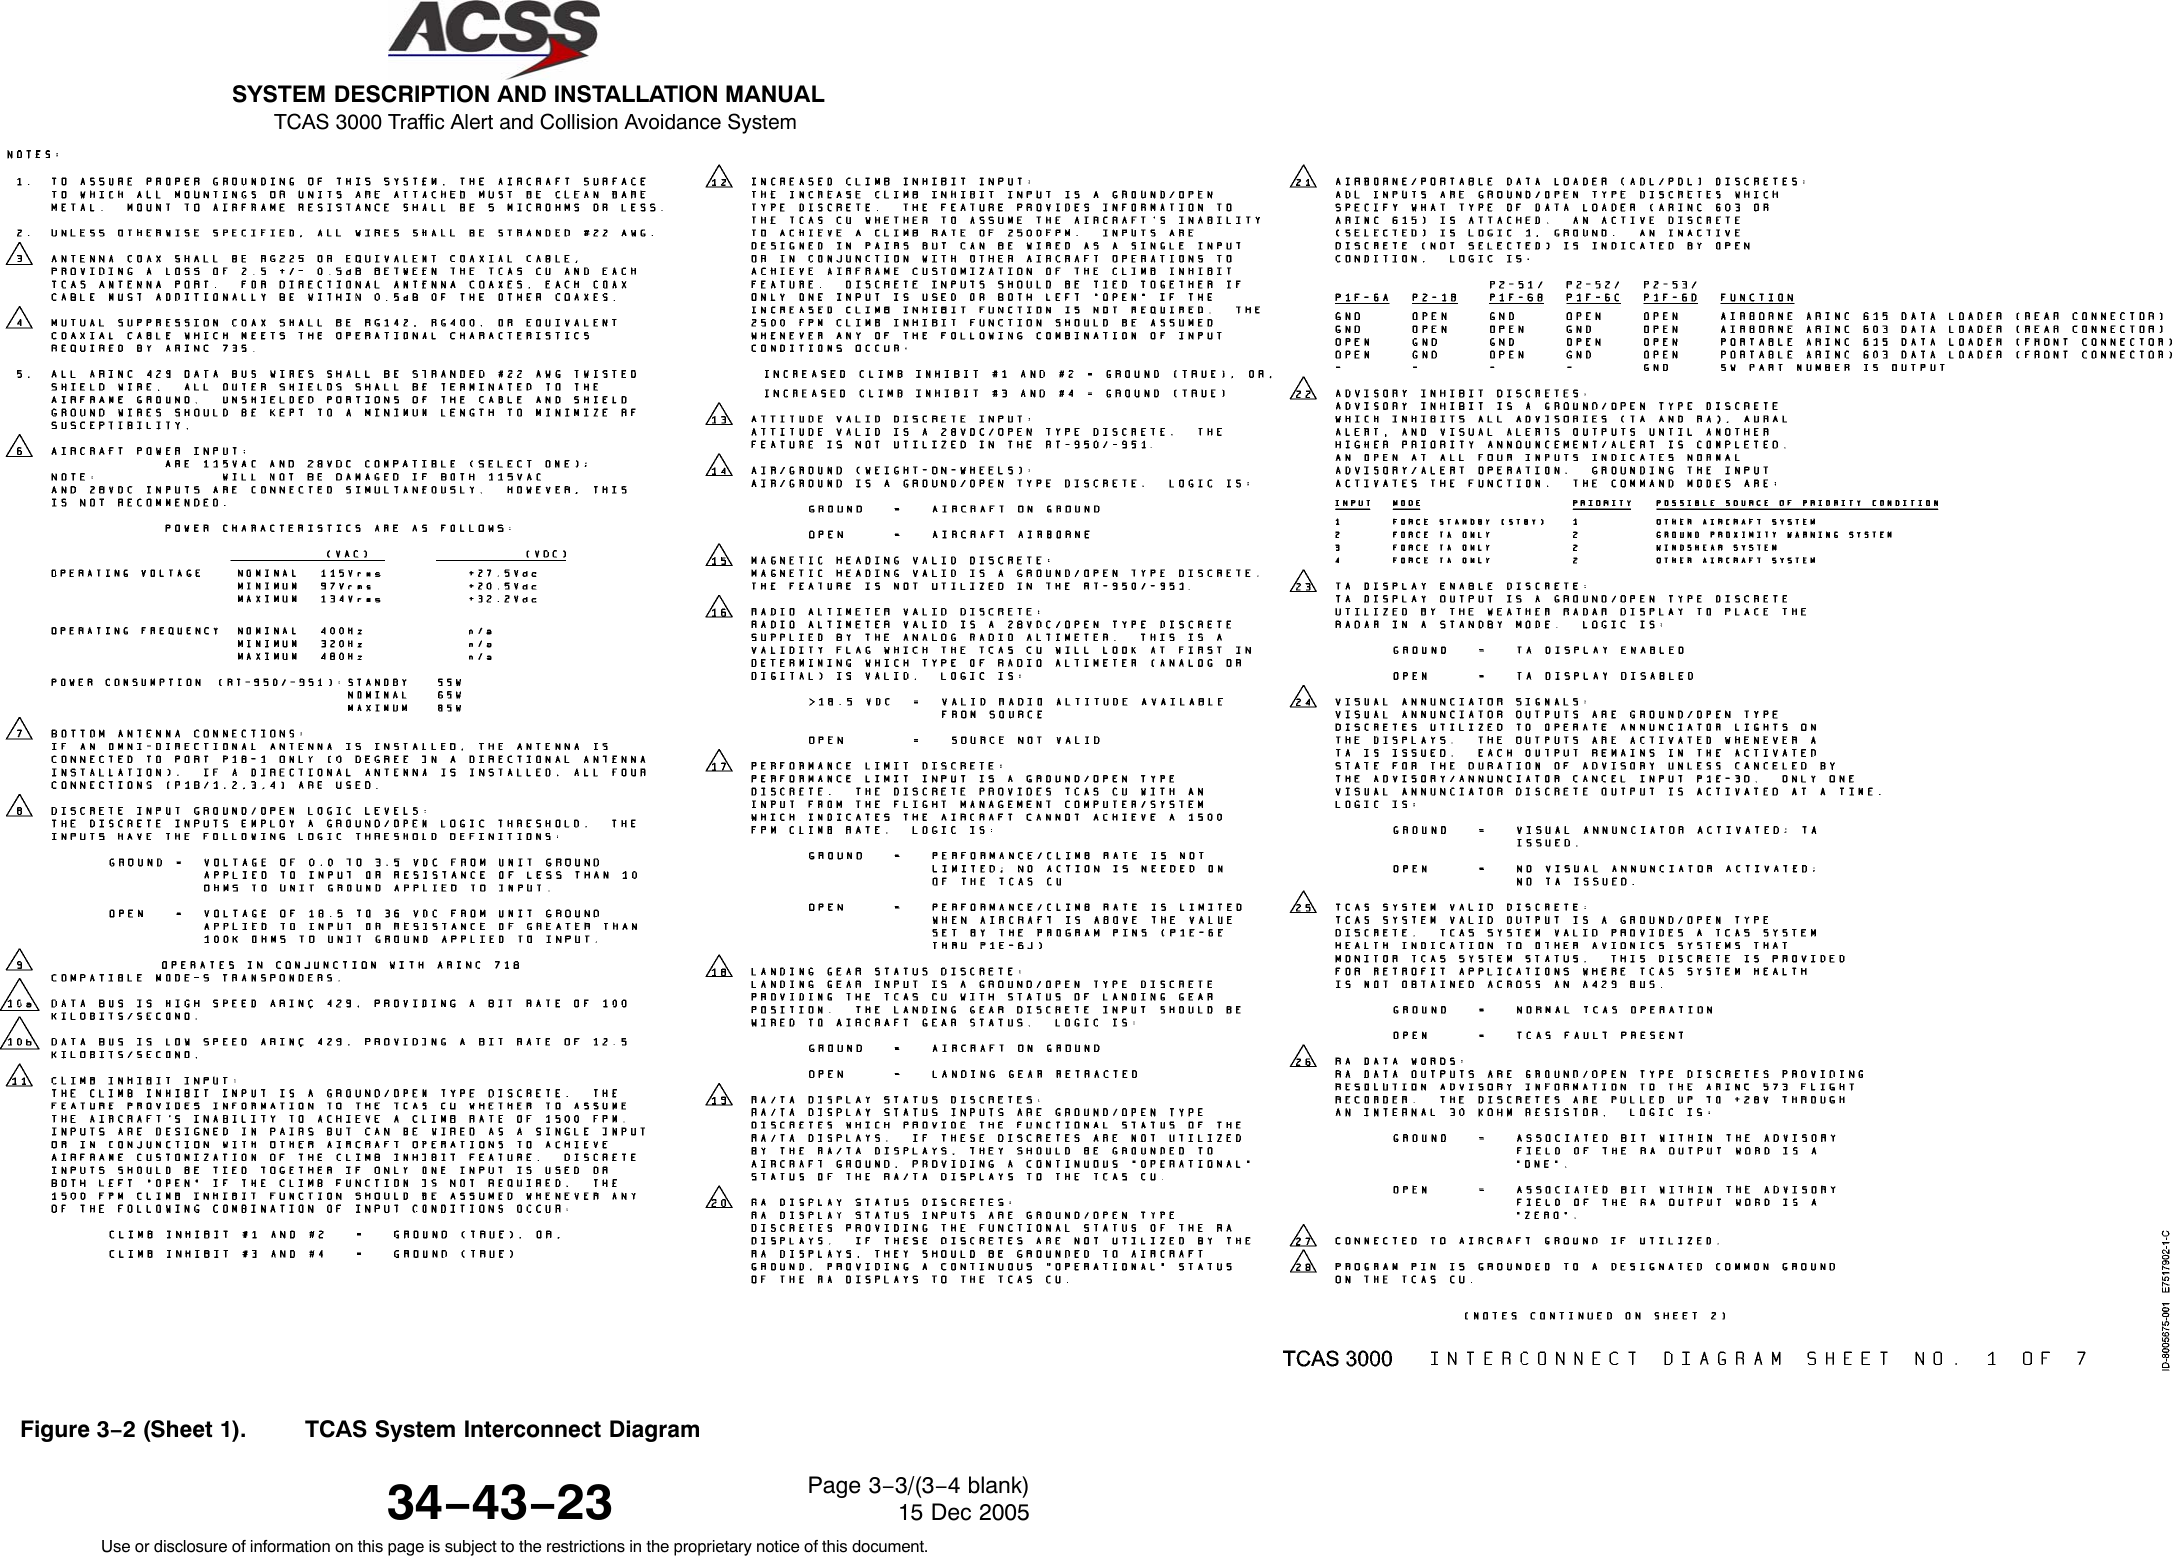  SYSTEM DESCRIPTION AND INSTALLATION MANUAL TCAS 3000 Traffic Alert and Collision Avoidance System34−43−23Use or disclosure of information on this page is subject to the restrictions in the proprietary notice of this document.Page 3−3/(3−4 blank)15 Dec 2005Figure 3−2 (Sheet 1). TCAS System Interconnect Diagram